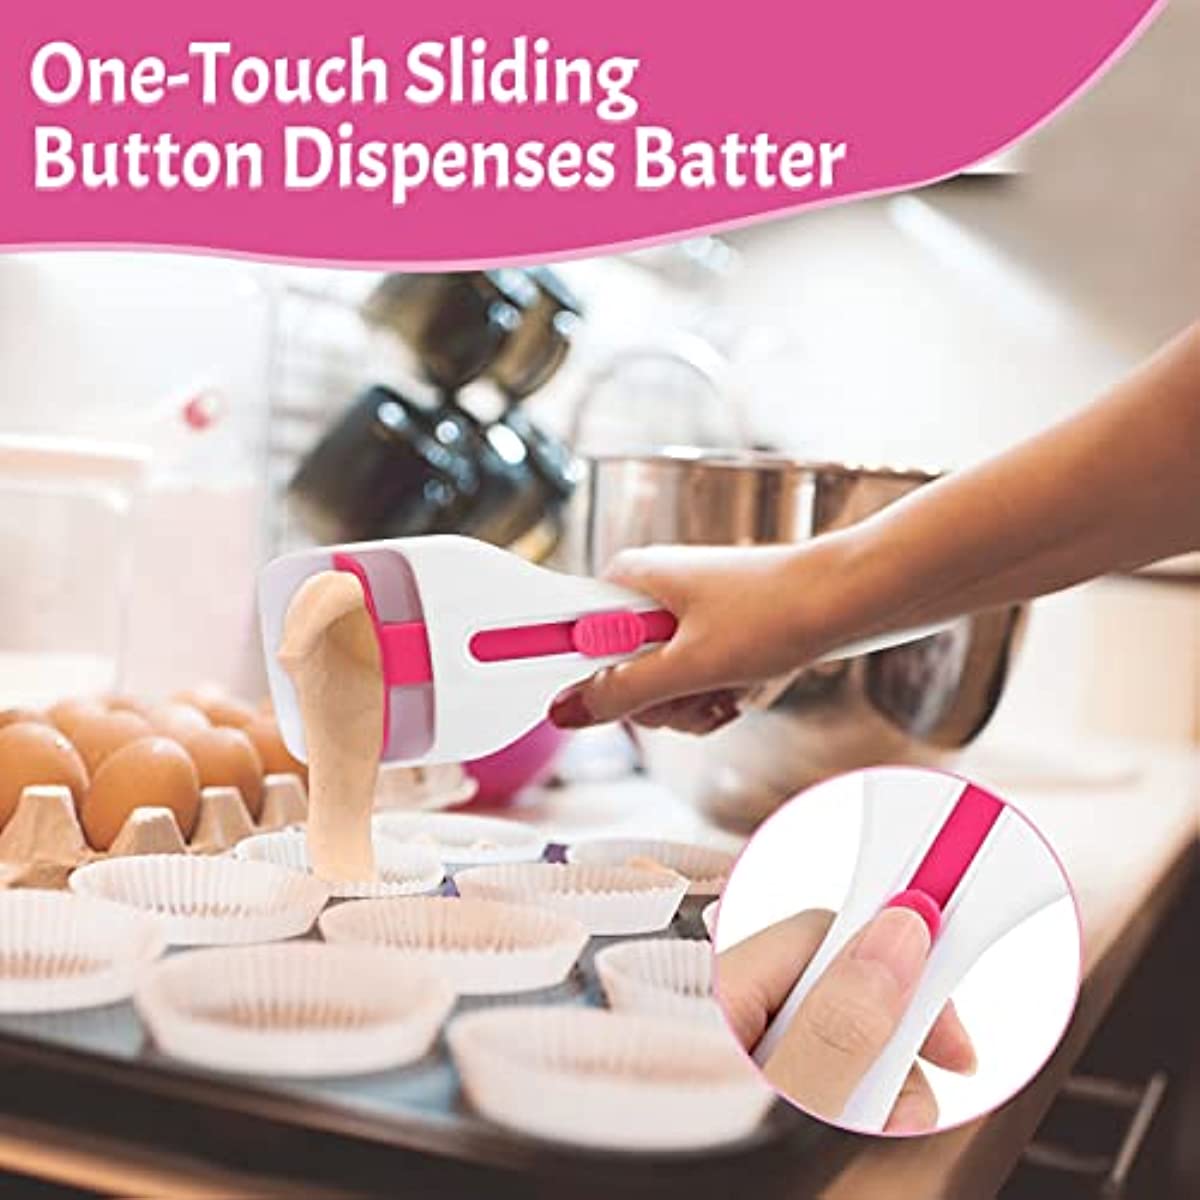  Tovolo Silicone Plunger, Muffins Cupcake Scoop